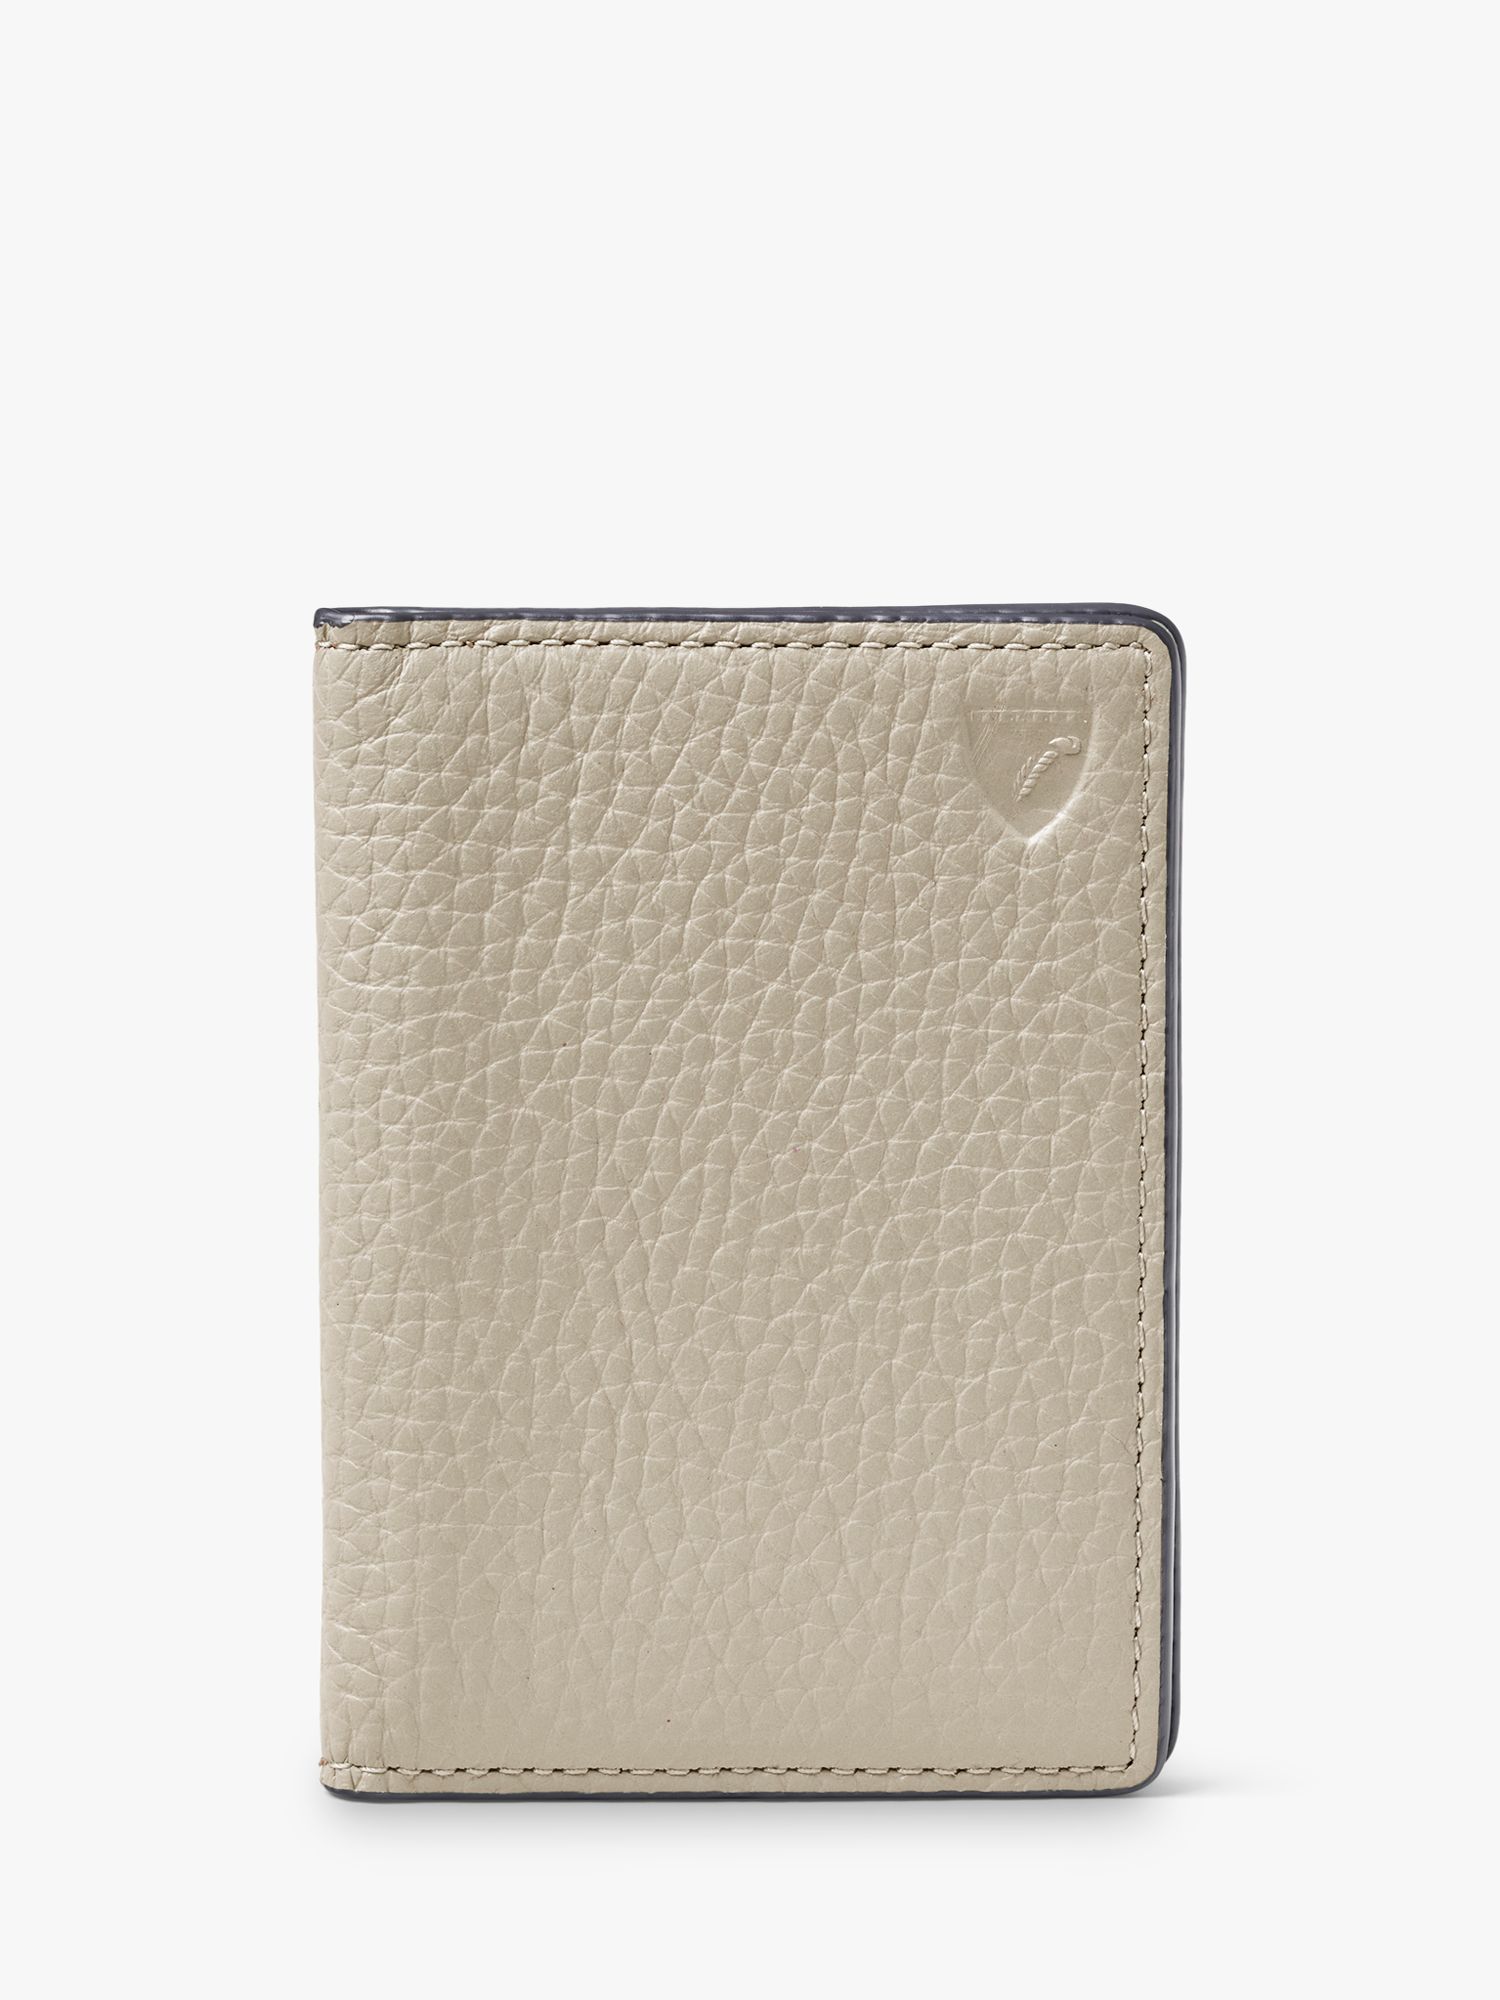 Aspinal of London Double Fold Pebble Leather Credit Card Case, Dove Grey